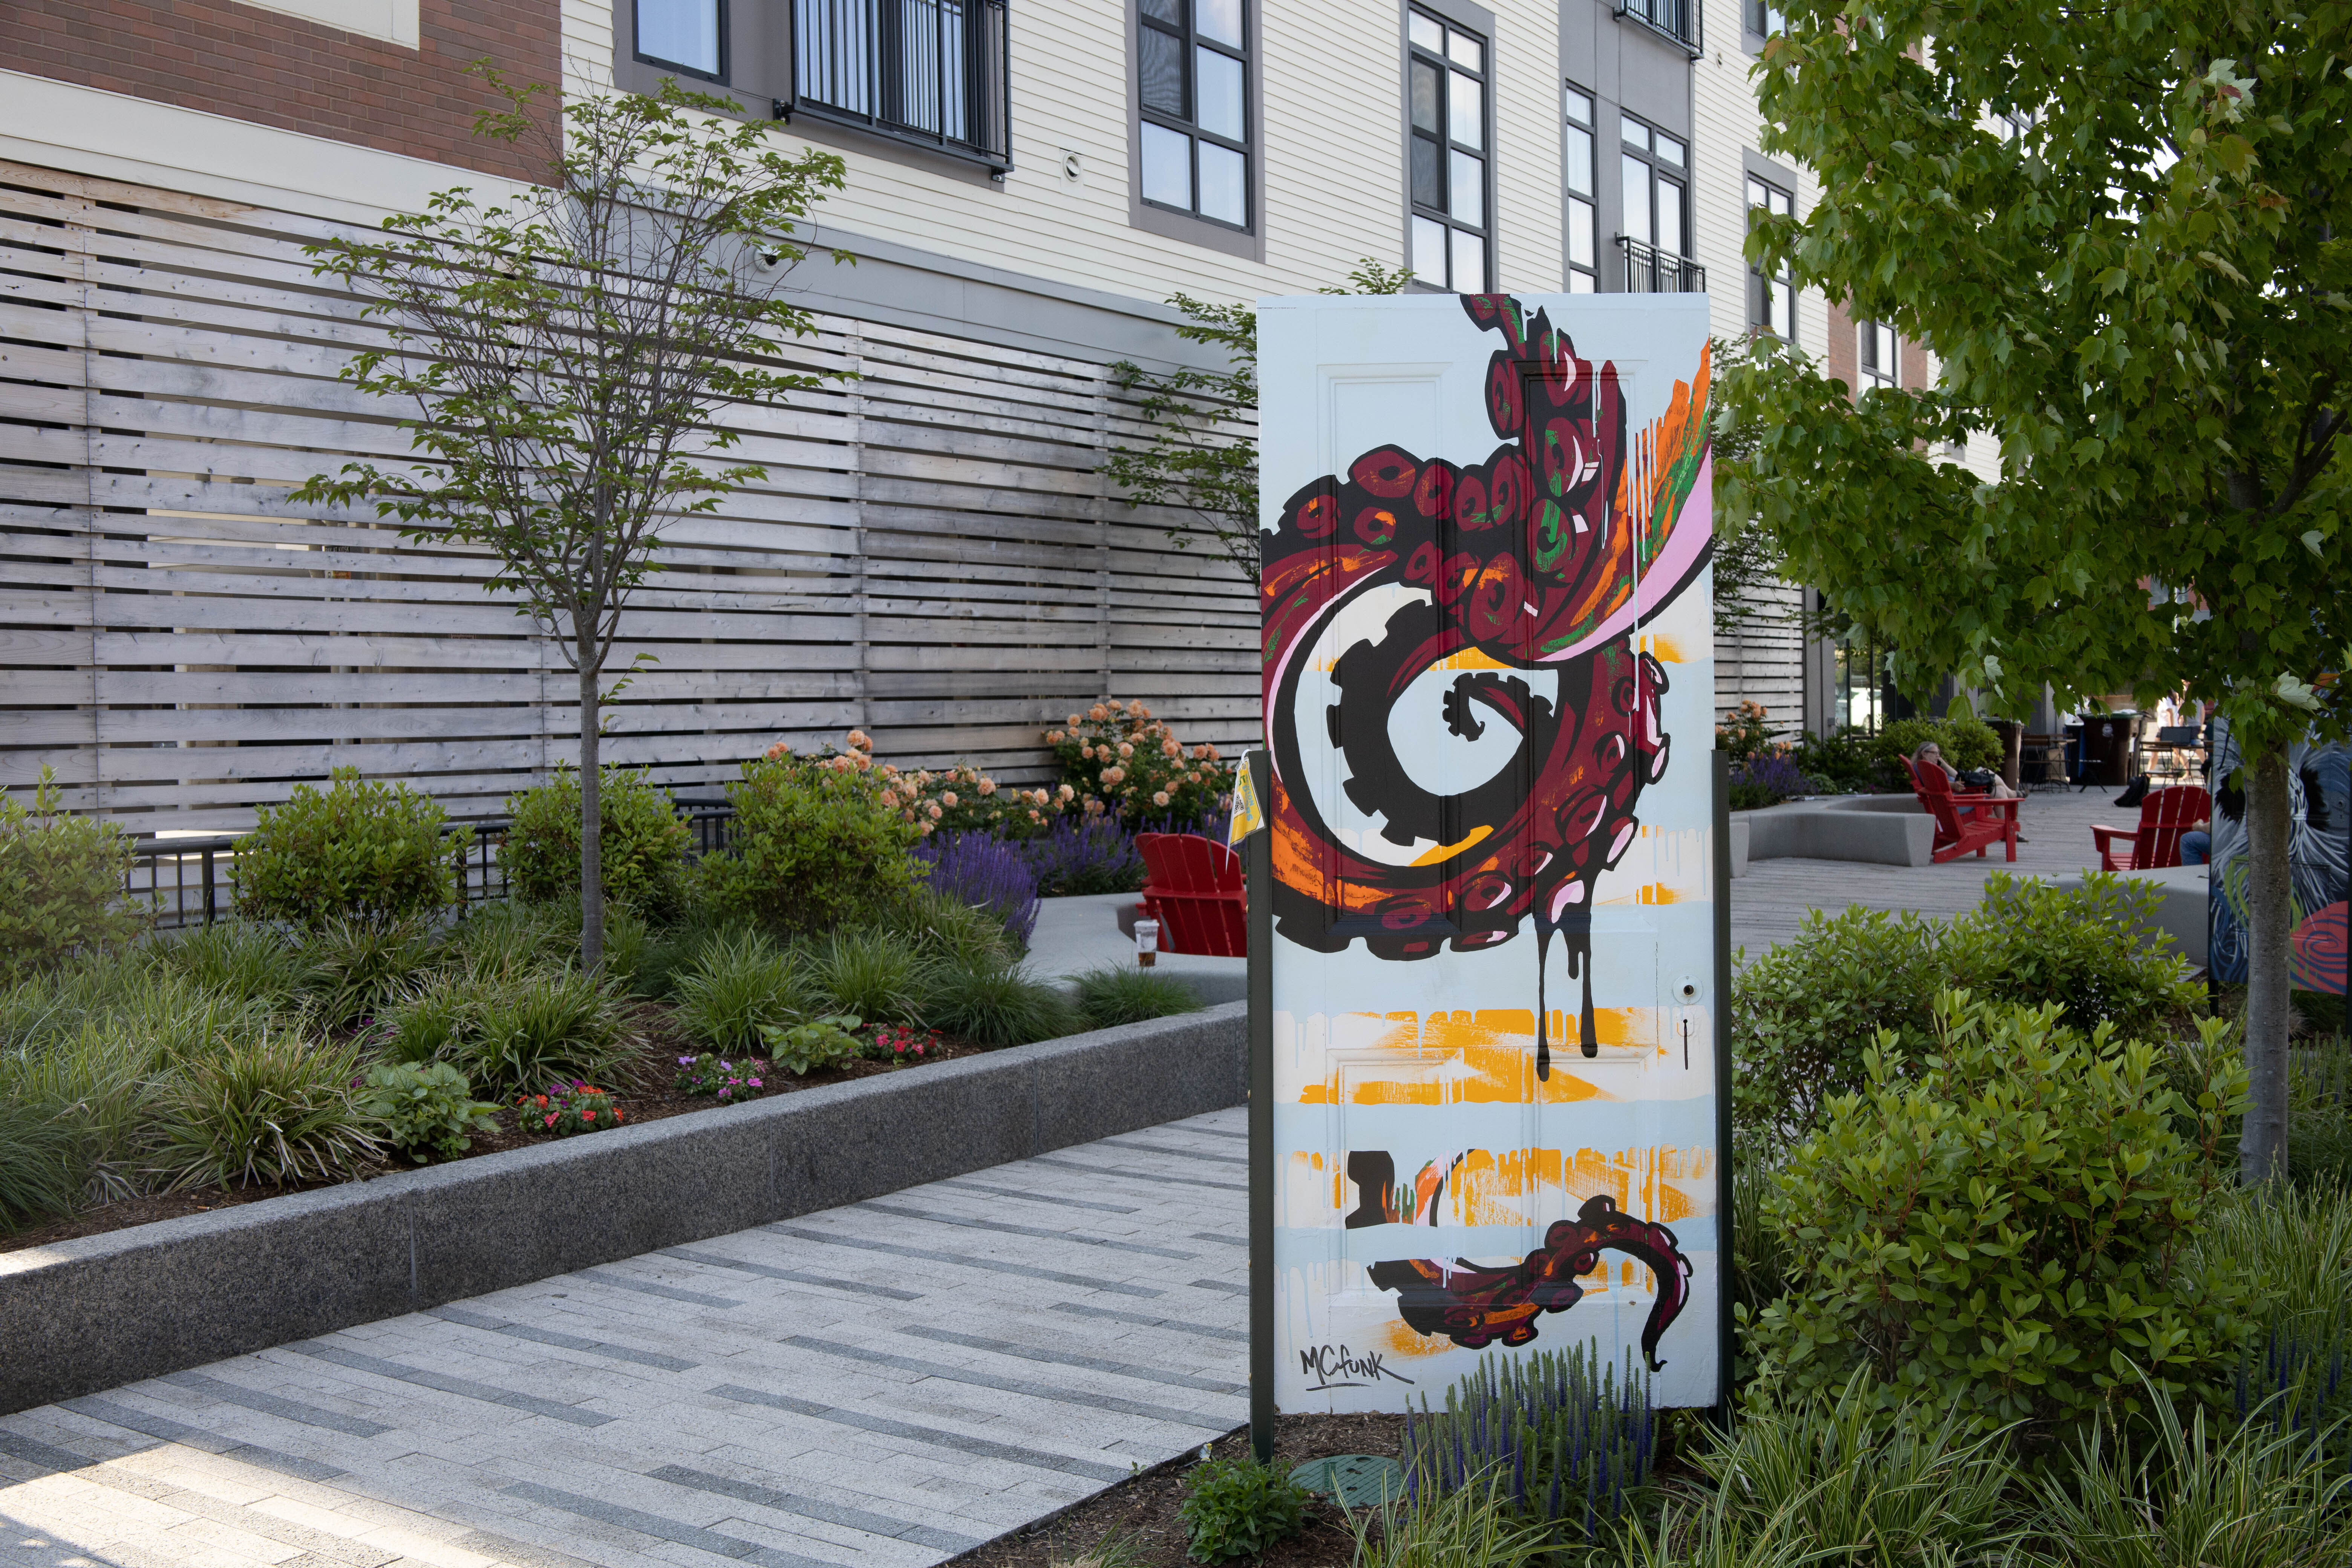 An art project called "Newton Out Doors" features 25 painted doors including "Contact" by Eric Funk. 